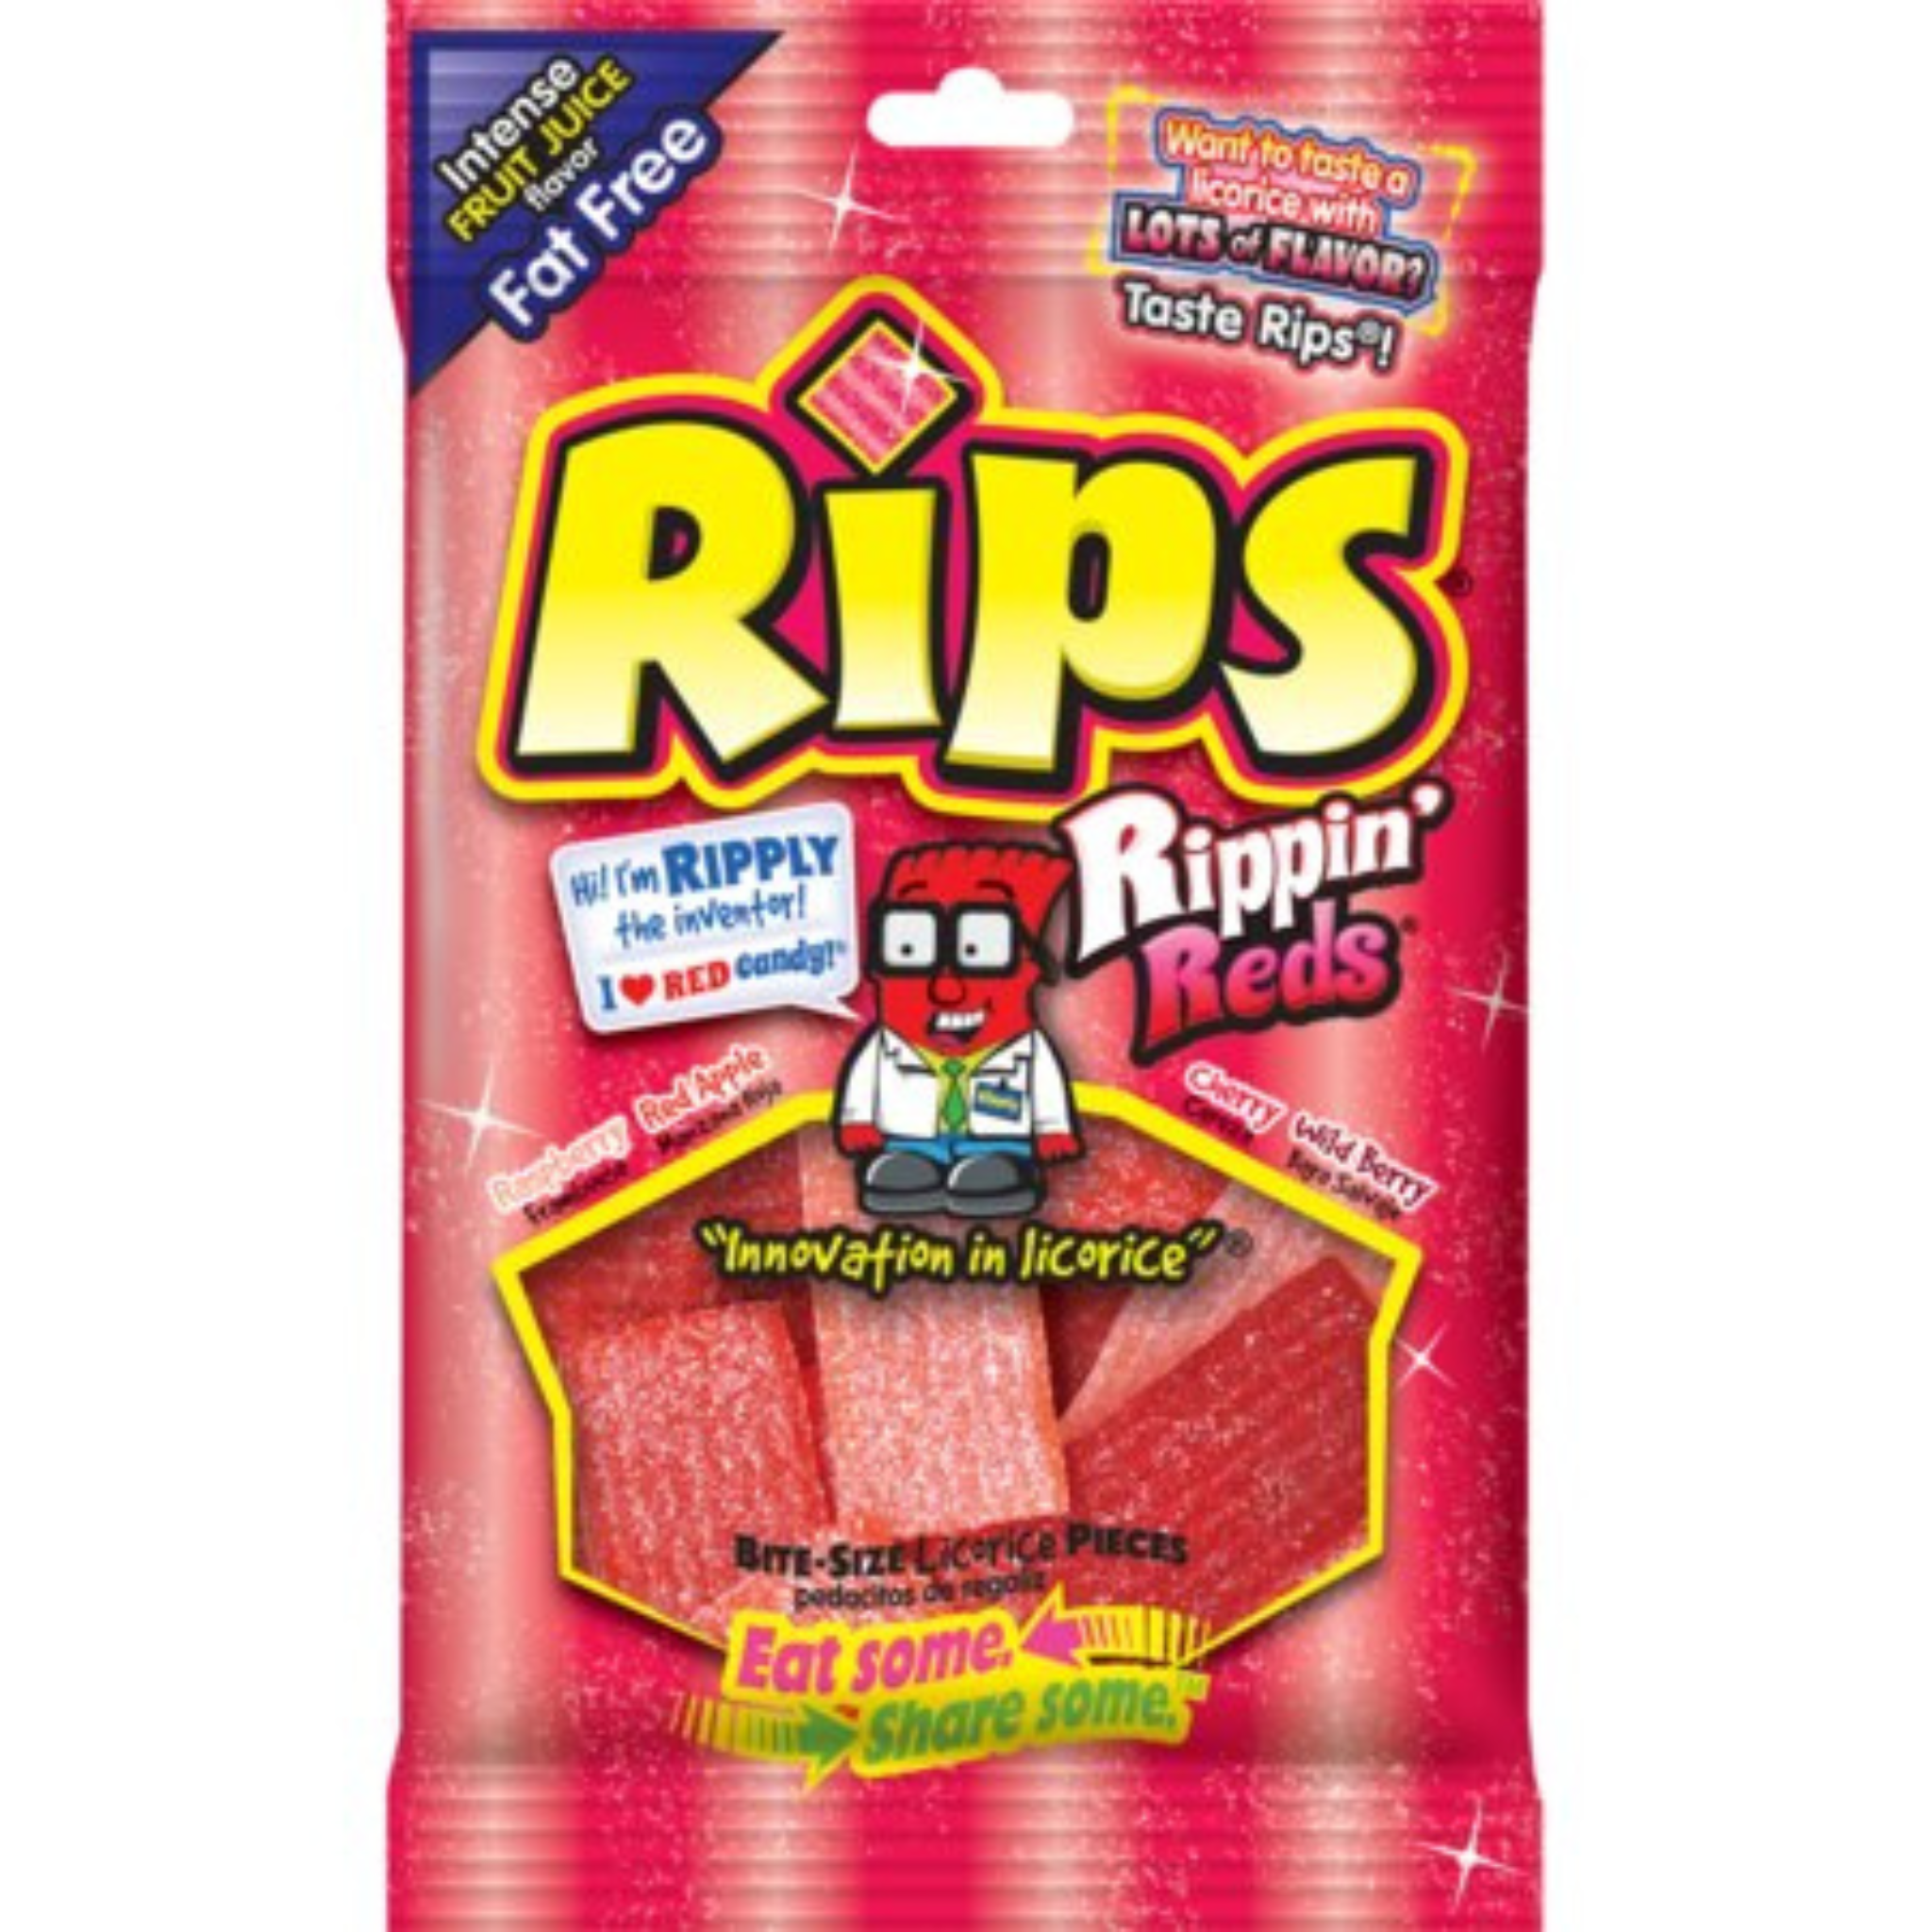 Rips Rippin Reds